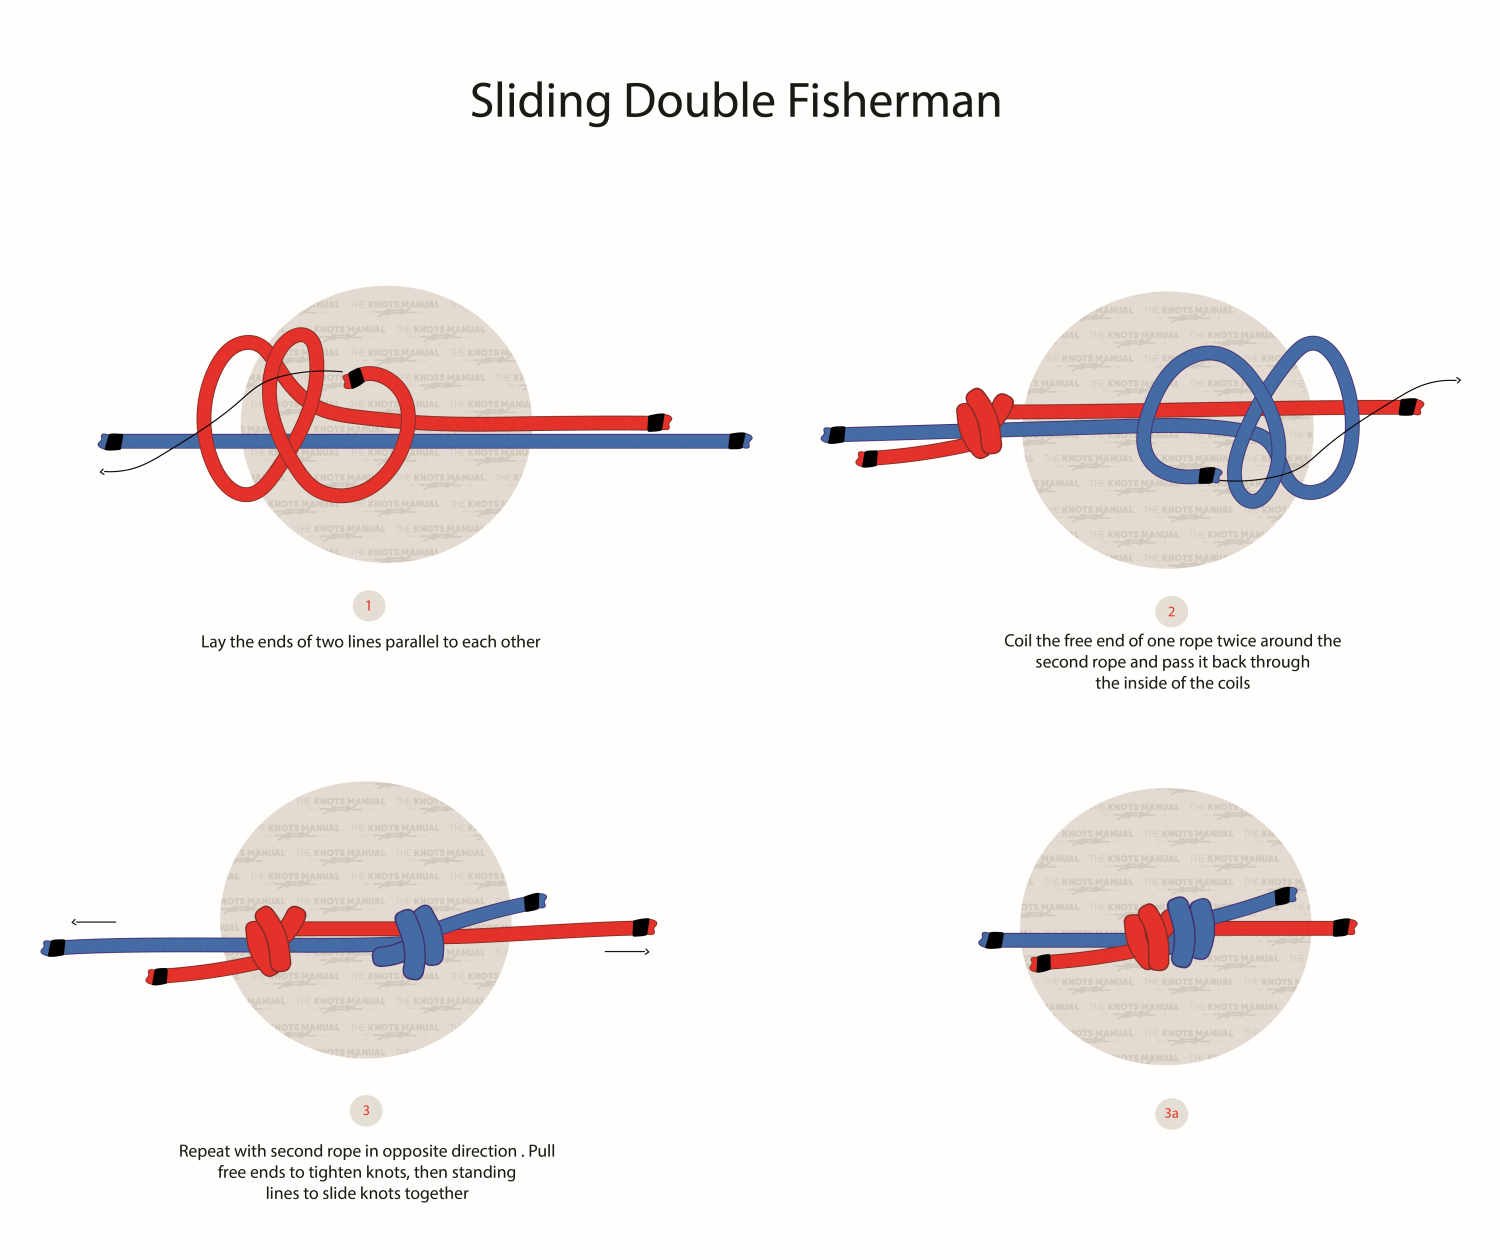 Sliding Double Fisherman’s Step by step